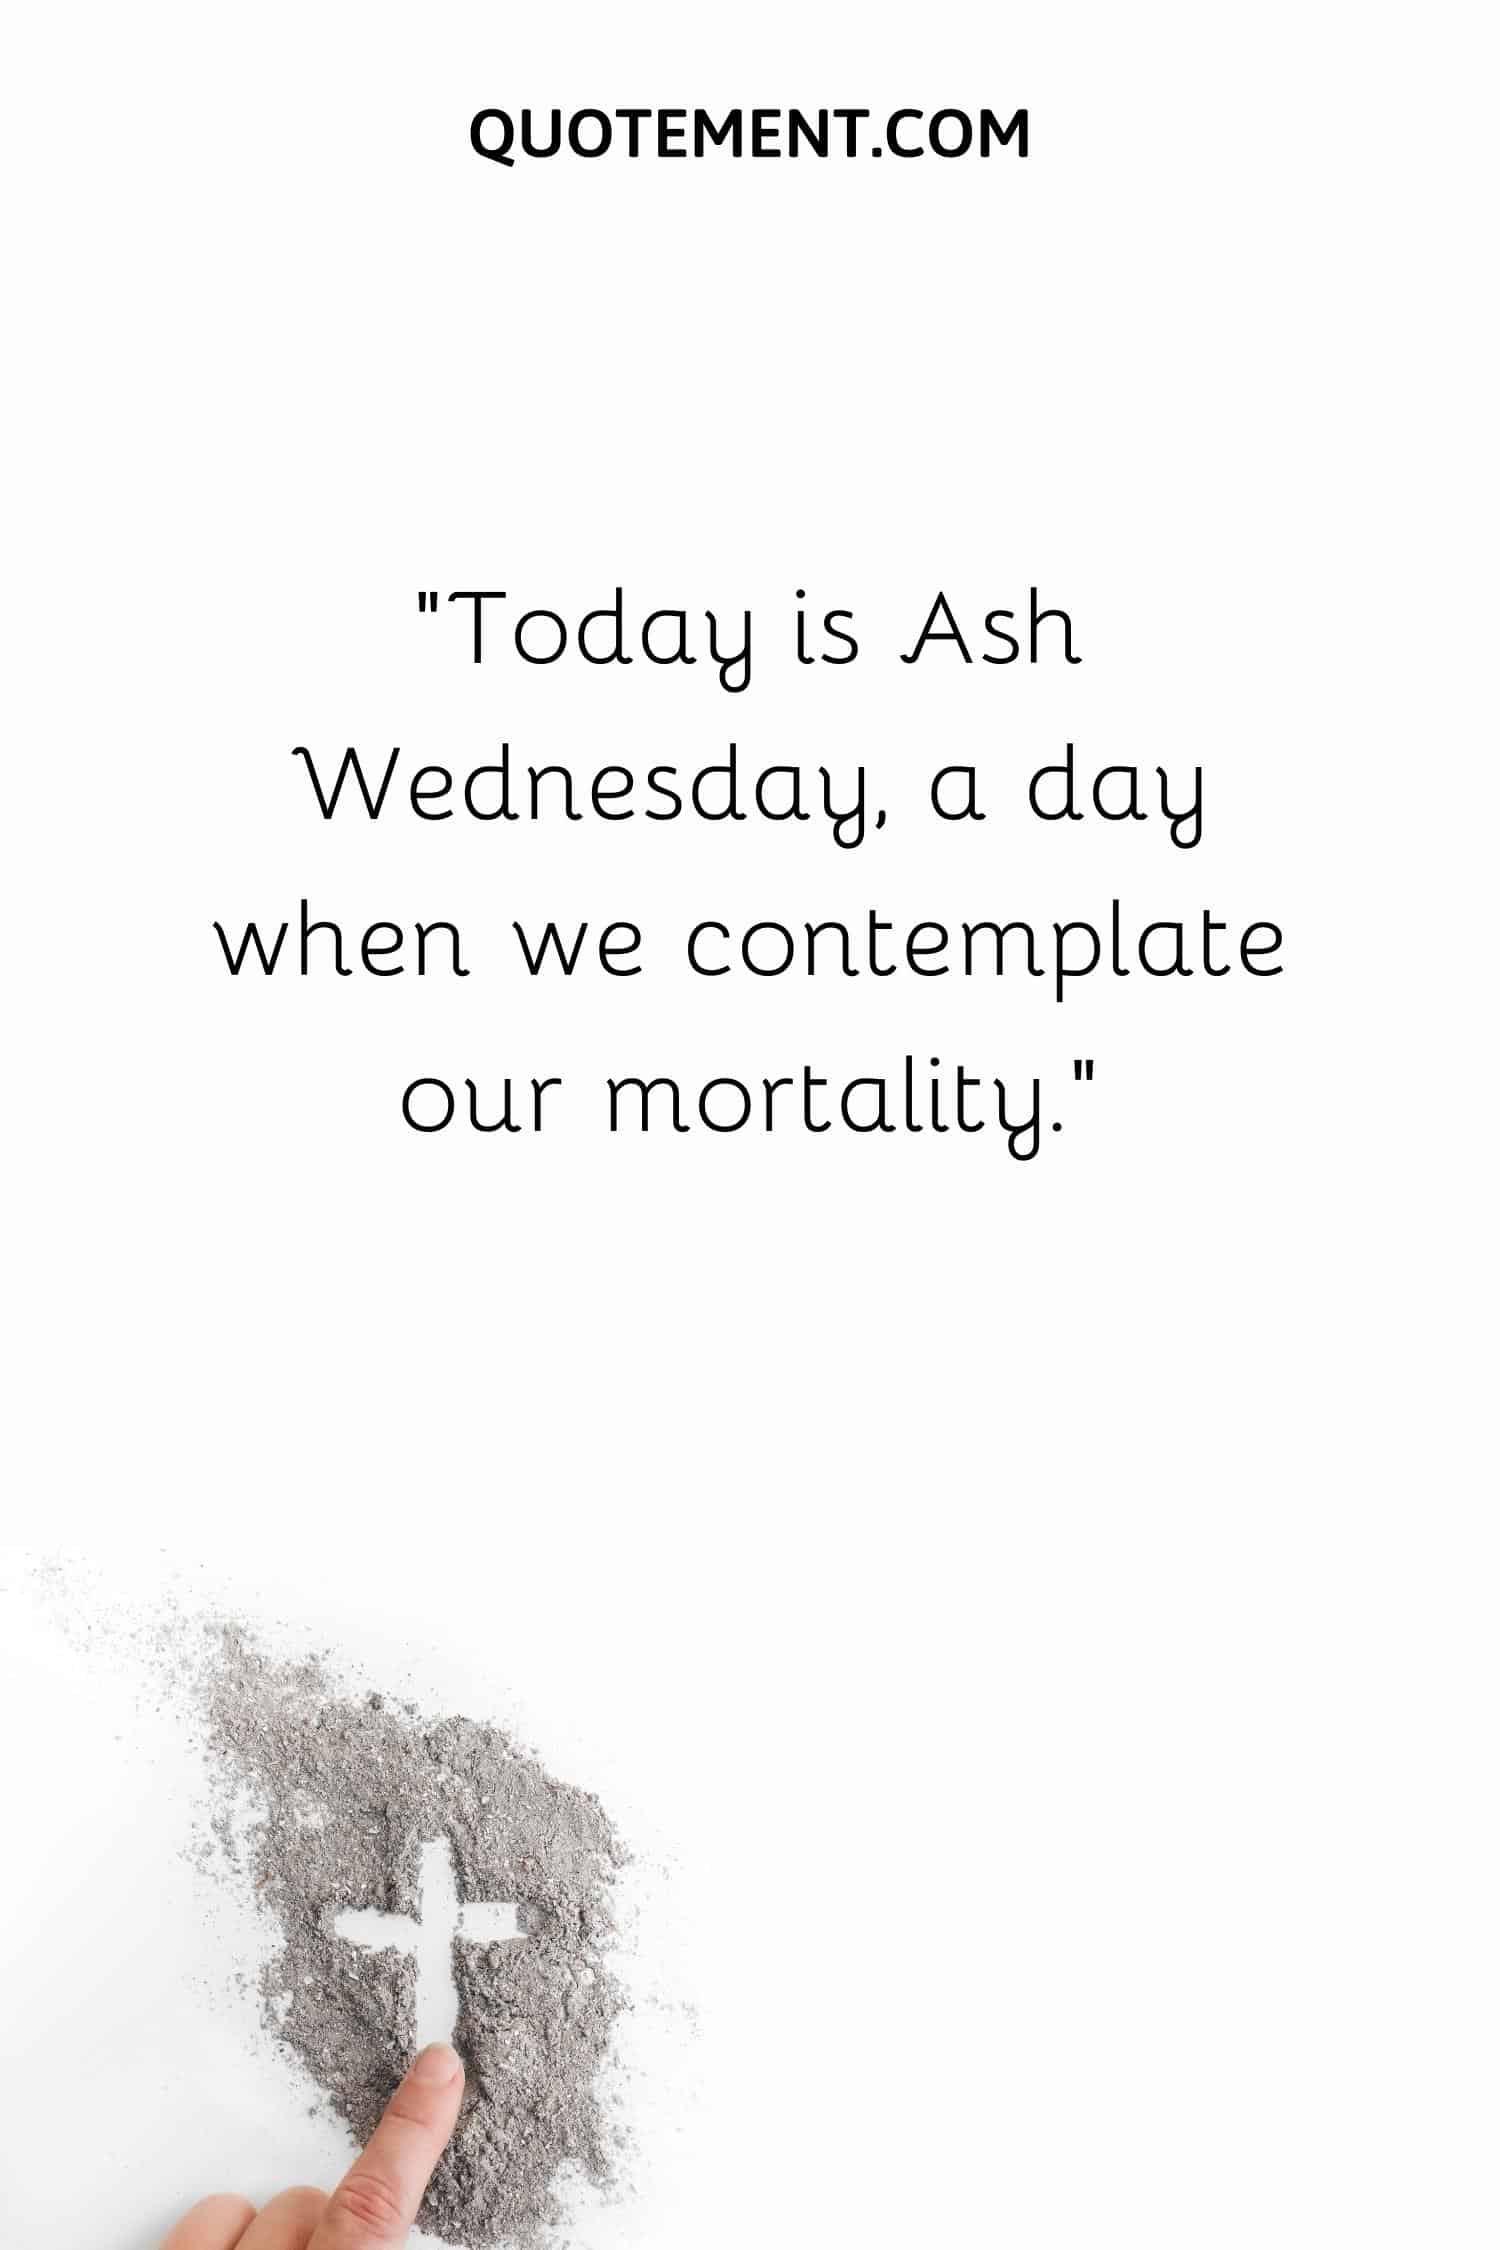 Today is Ash Wednesday, a day when we contemplate our mortality